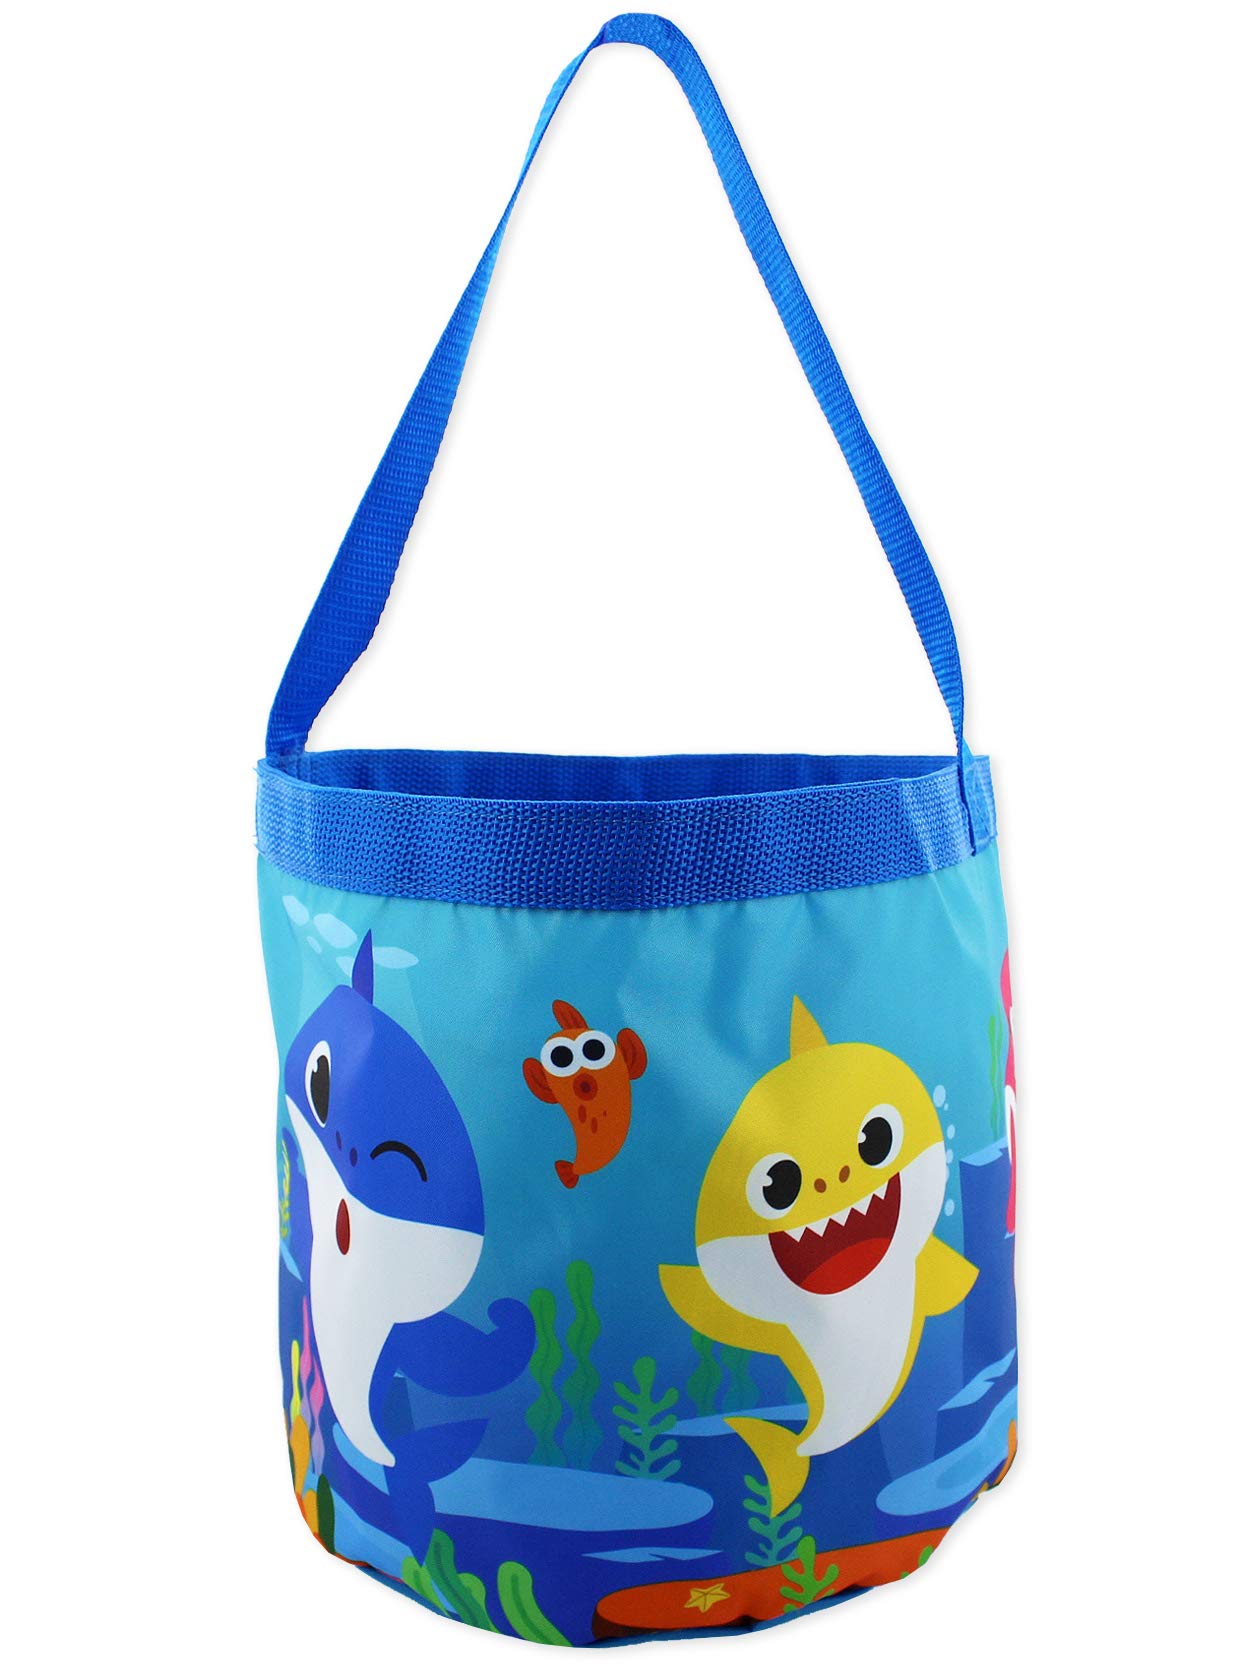 Baby Shark Boys Girls Collapsible Gift Basket Bucket Tote Bag (Blue, One Size)